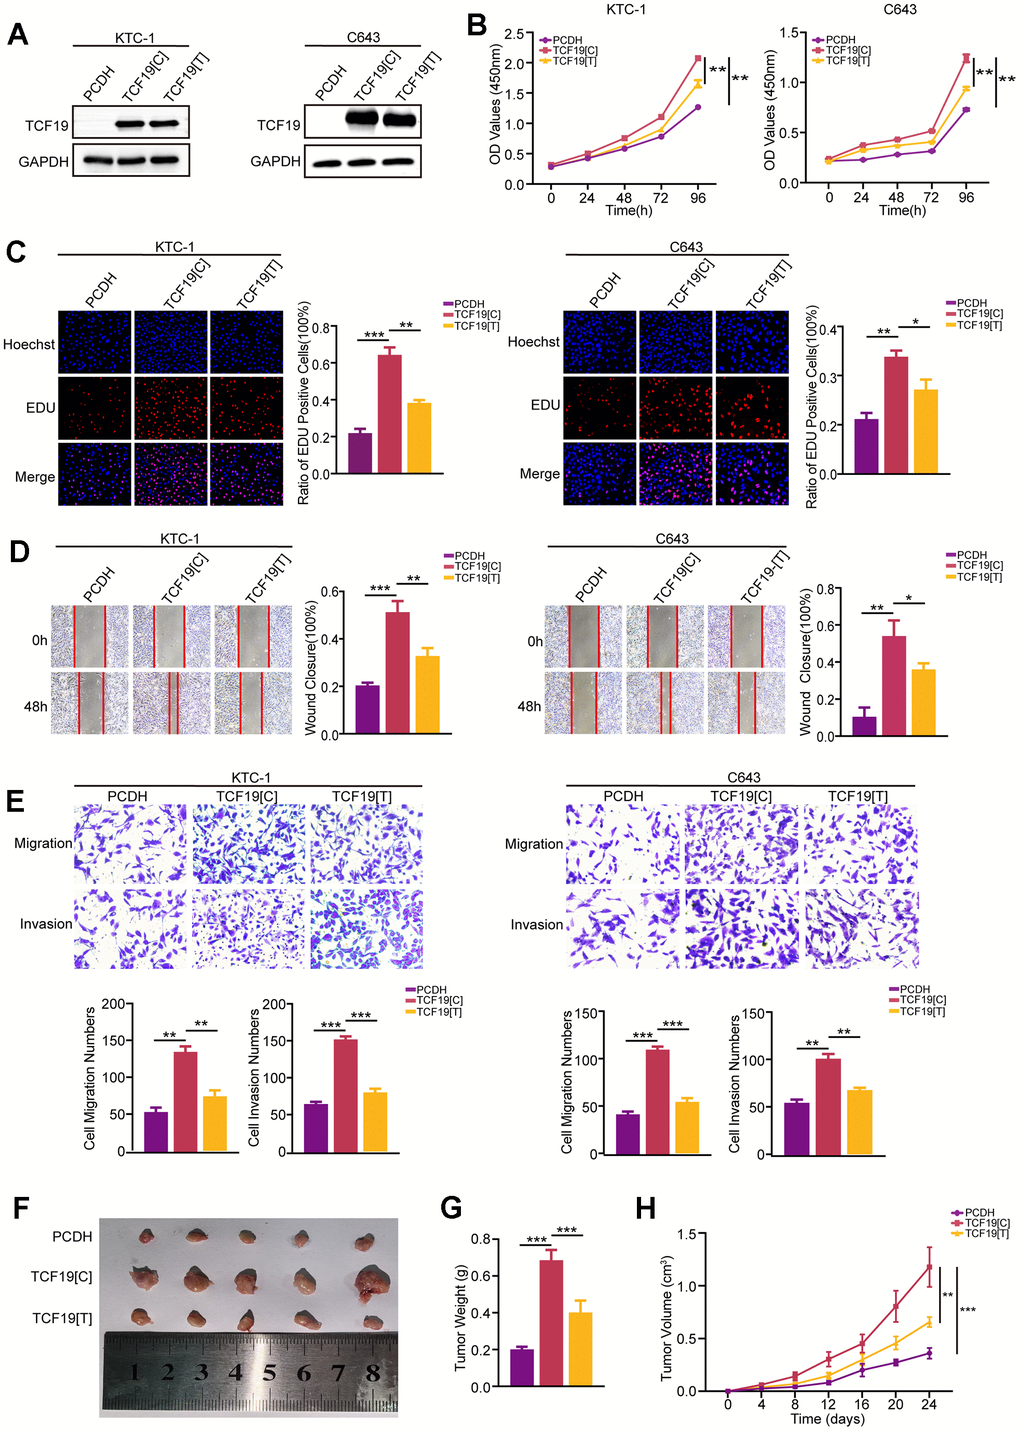 TCF19[C] and TCF19[T] expression impacts thyroid cancer progression. (A) TCF19 expression was detected in KTC-1 and C643 cells transfected with pcDNA, TCF19[C] and TCF19[T] plasmids by Western blotting. (B) CCK8 assay was used to detect cell viability. (C) The EdU method was used to detect DNA synthesis. (D) Wound healing assay was used to detect cell migration. (E) Transwell assay was used to detect cell invasion and migration in the cells indicated above. (F) Tumor images in tumor-bearing mouse groups. (G) Mouse tumor weights in various groups. (H) Mouse tumor volumes were measured every four days. Data are shown as means ± S.D. *p p p 